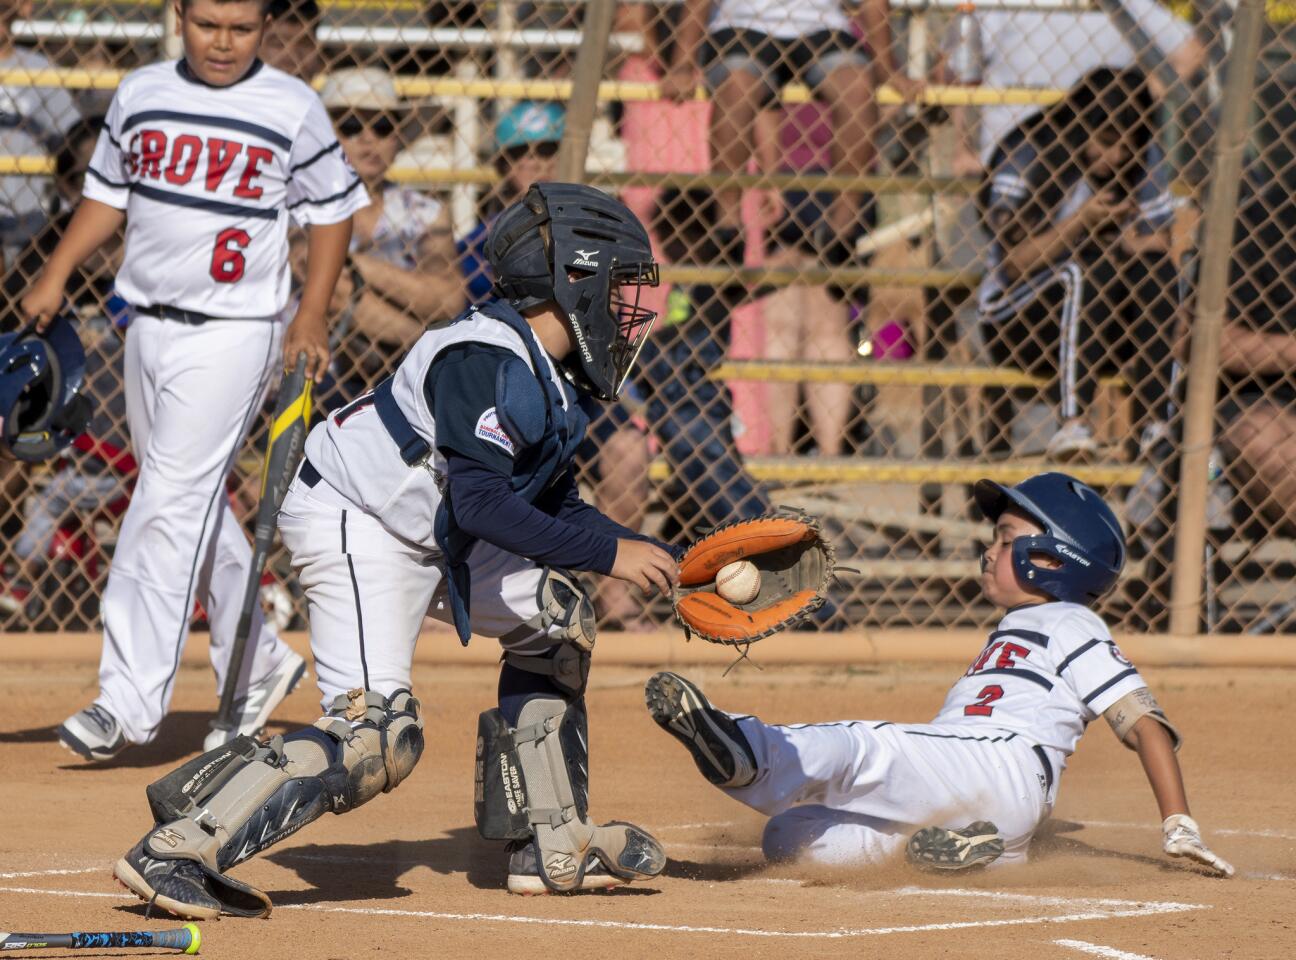 Newport Harbor Baseball Association's Brooks Francis attempts to make a tag on Garden Grove's Khai Anderson during a PONY Mustang 10-and-under district tournament game at Fountain Valley Sports Park.